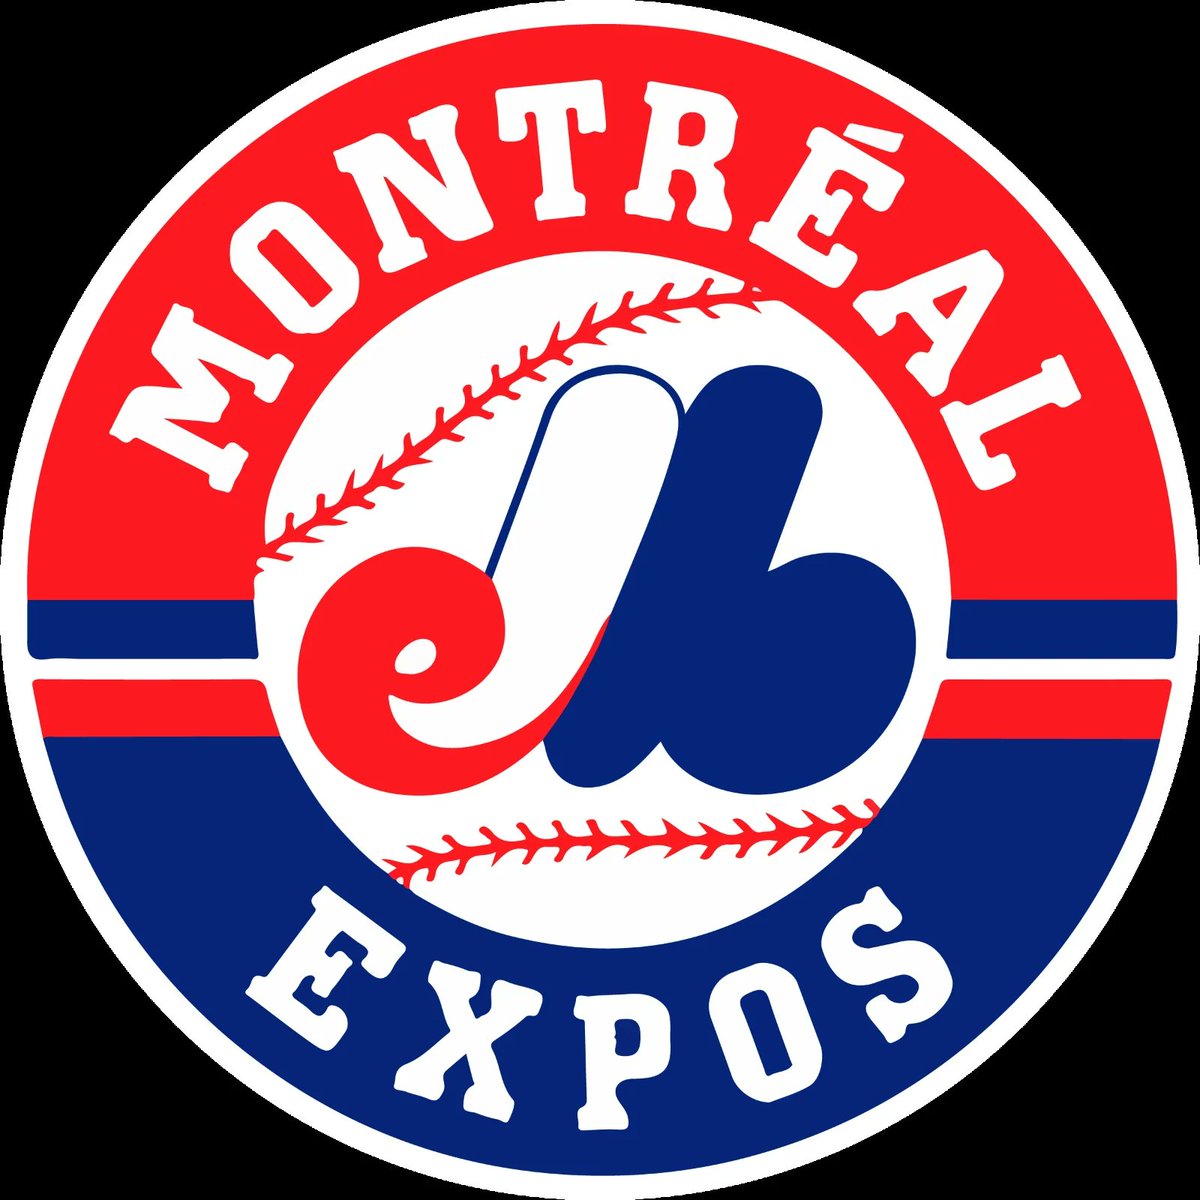 Looking ahead to #expos 2024. * Robbie Hart (pic) releasing 95-minute doc. * @terrymosher1 & I coming out with books. * @exposfest returns * We're keeping #expos legacy alive, acknowledging the 20th anniversary of team leaving town, '94 club, '69 start * Follow us for details.